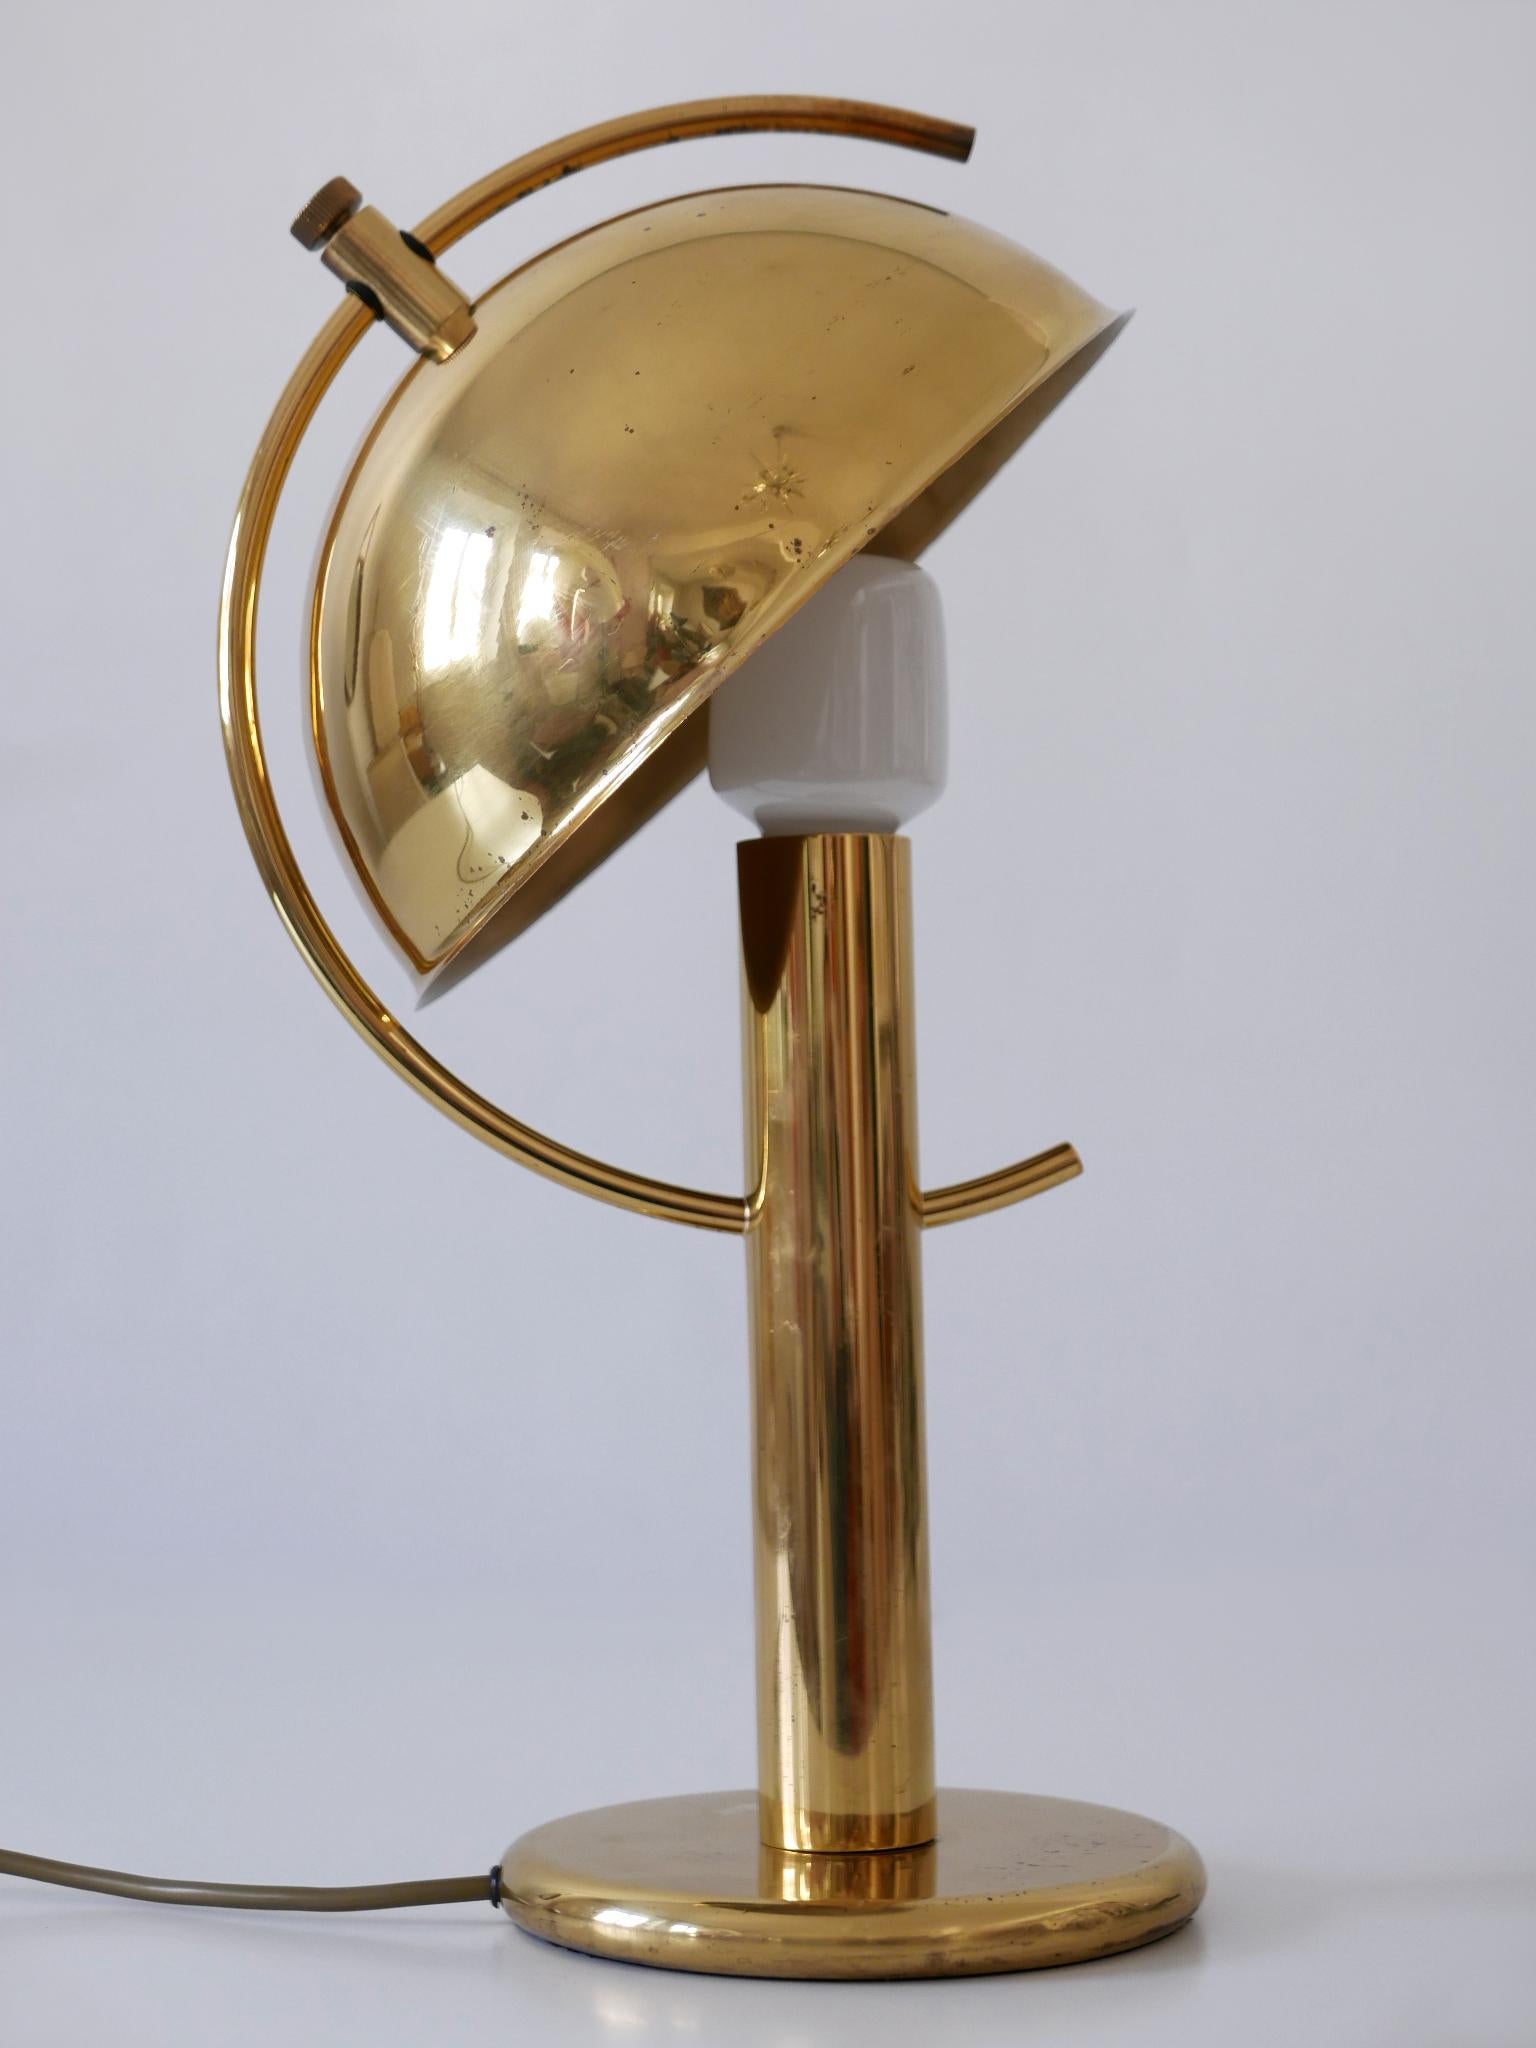 Exceptional Mid-Century Modern Brass Table Lamp by Gebrüder Cosack Germany 1960s For Sale 8